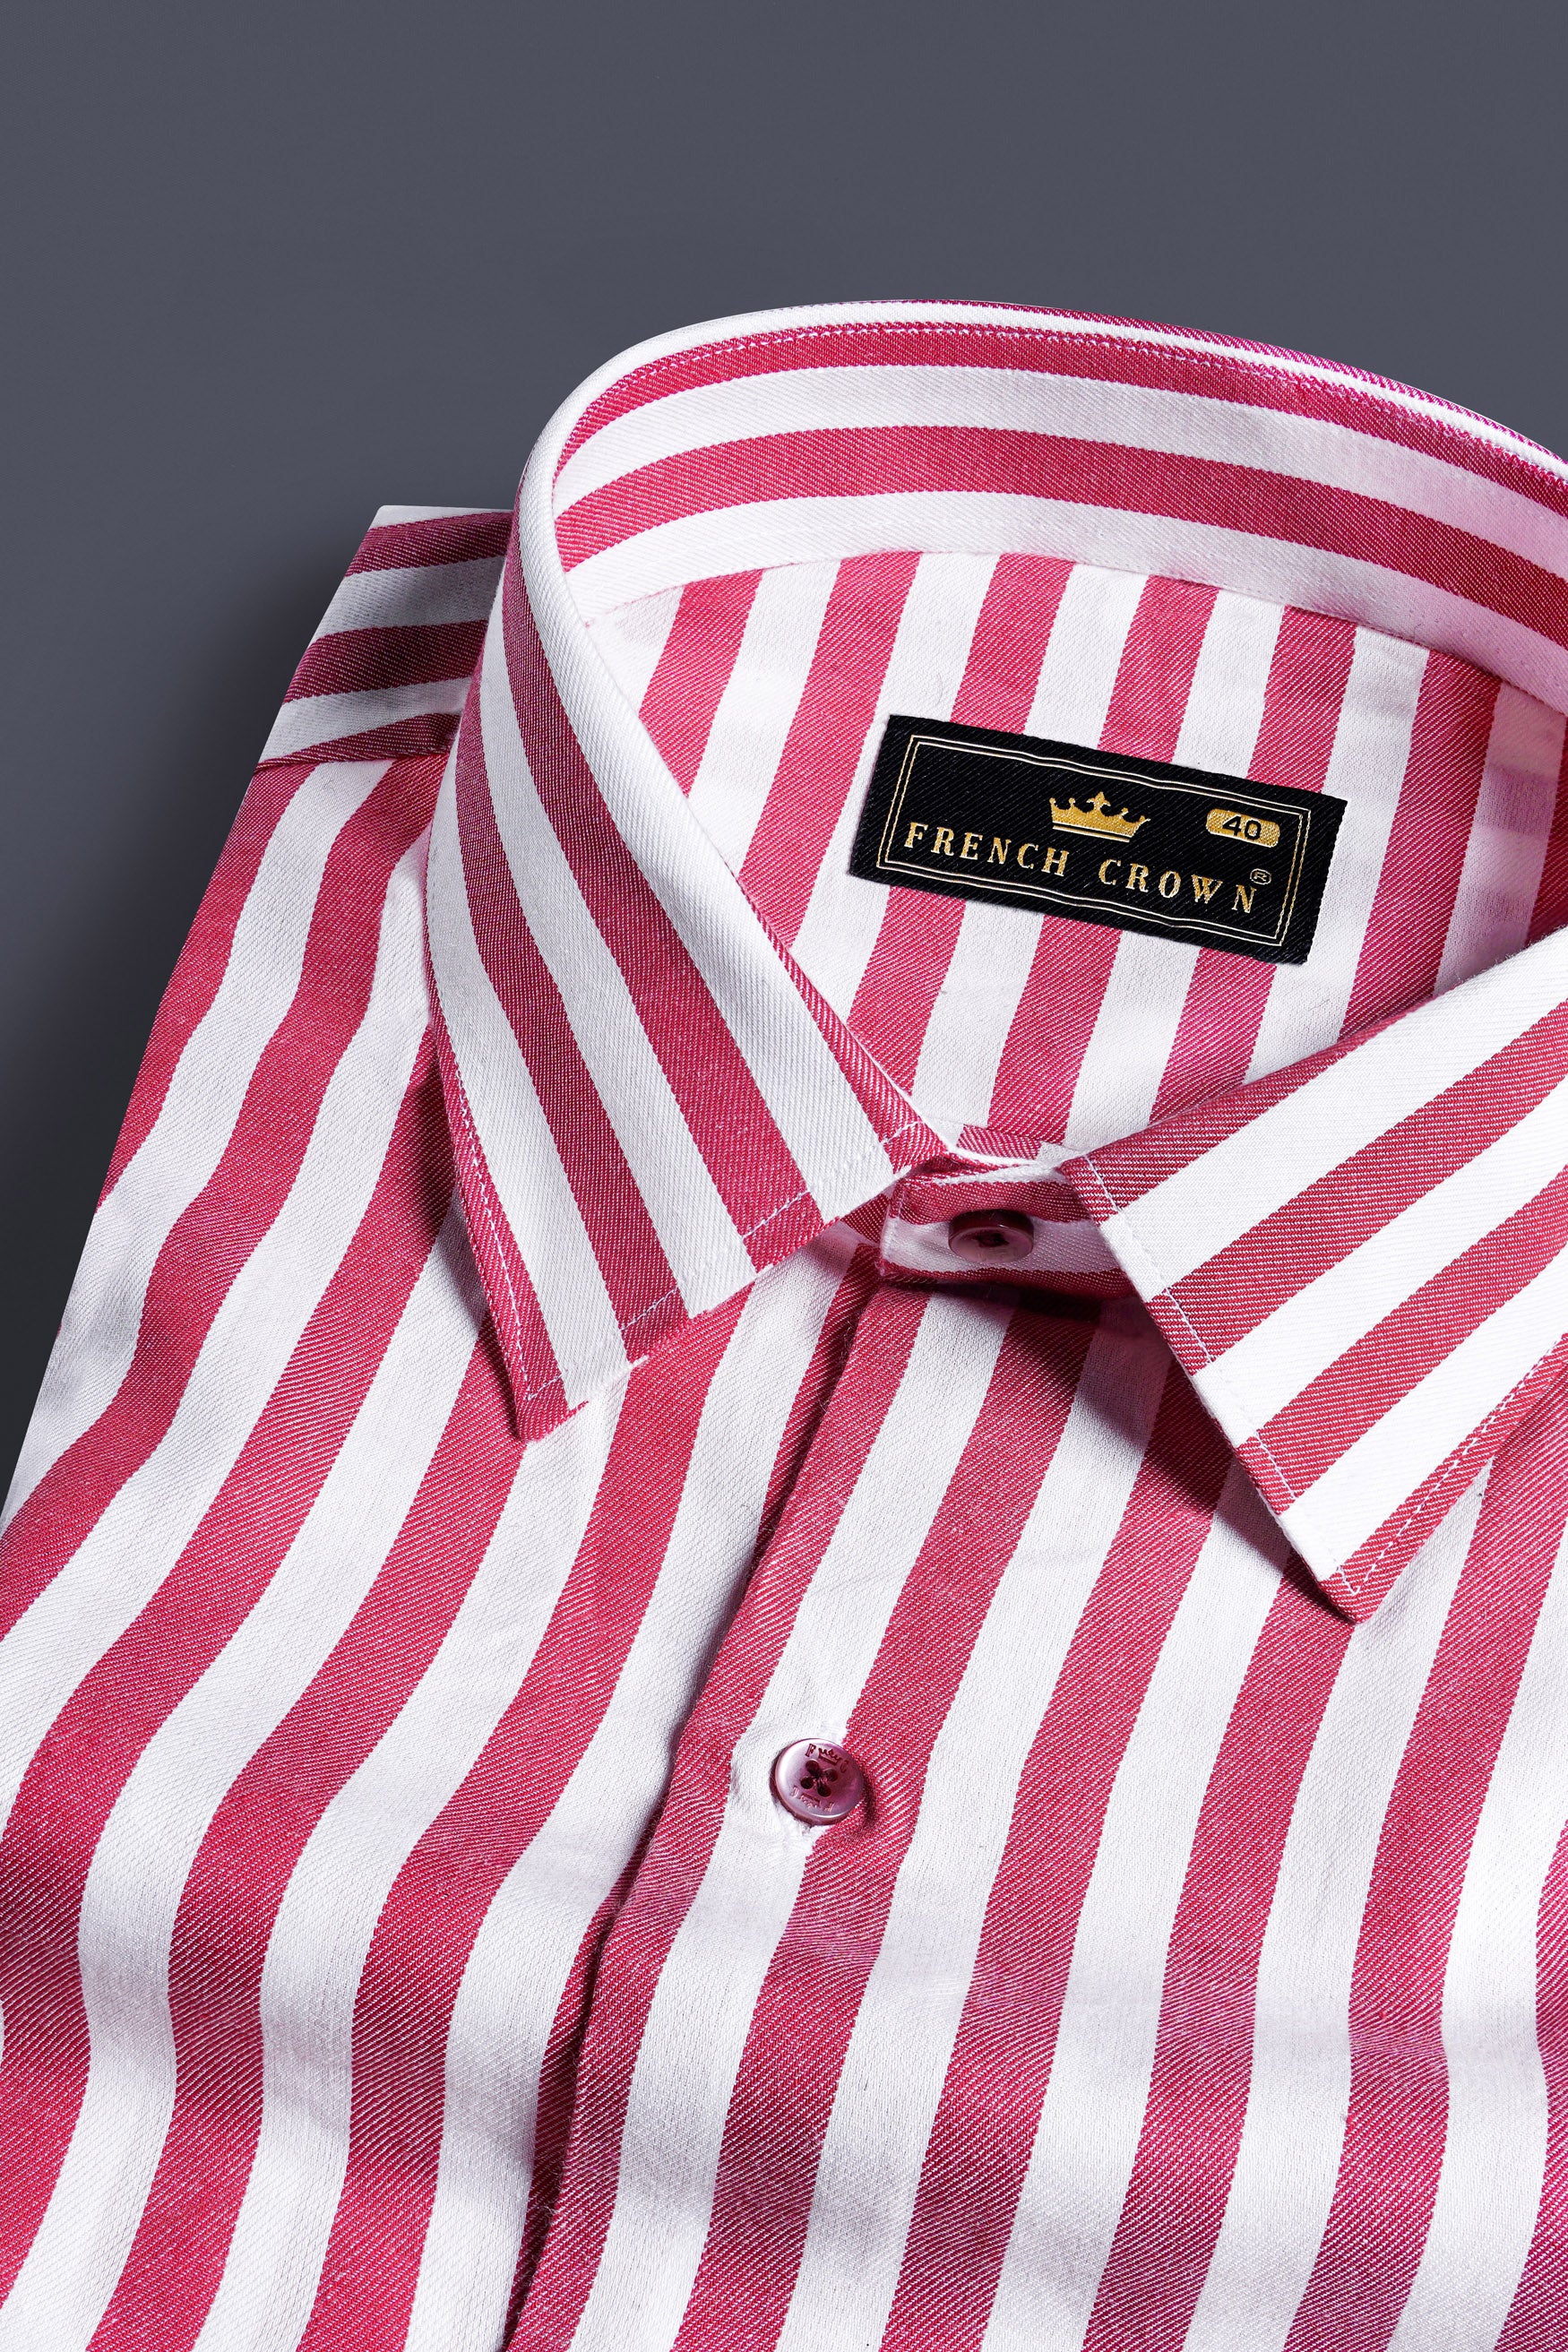 Rouge Pink and White Striped Twill Premium Cotton Shirt